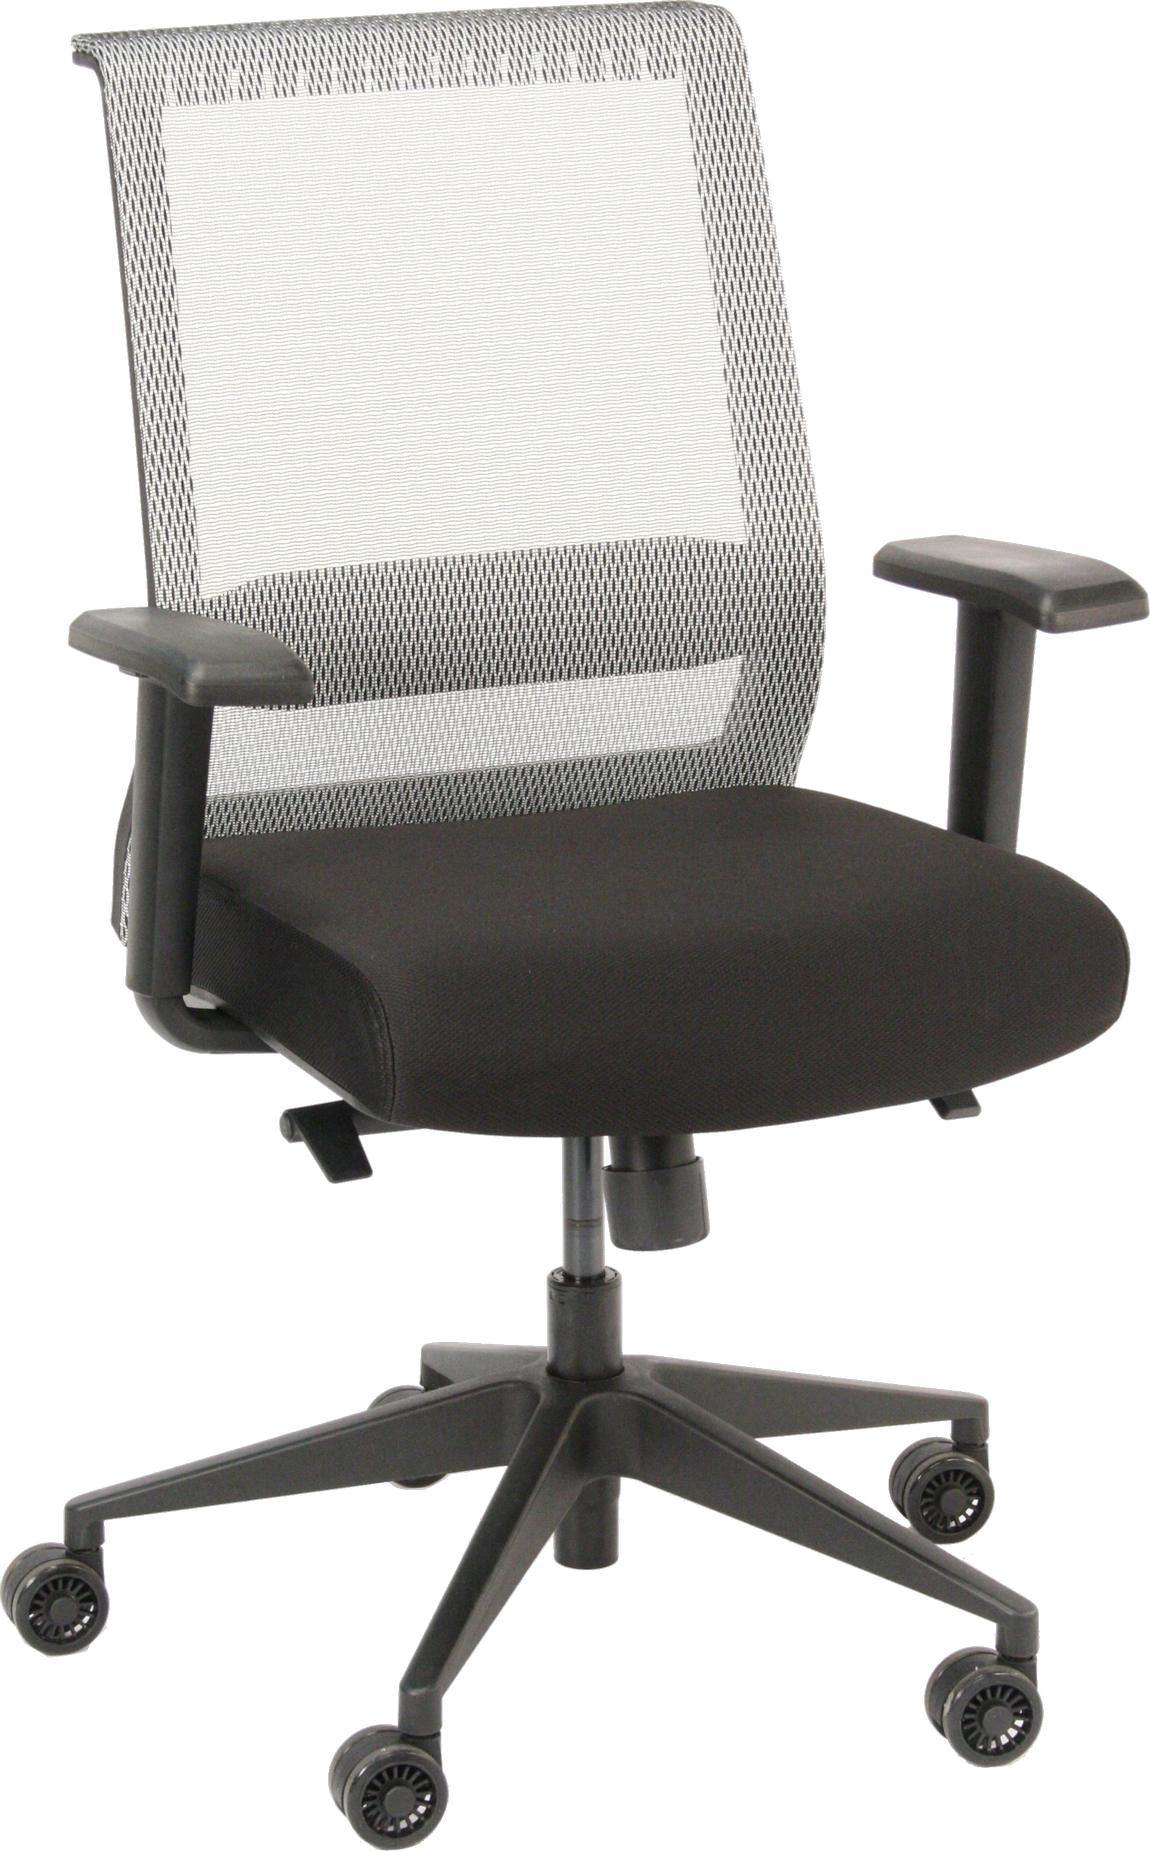 Heavy Duty Swivel Chair with Lumbar Support